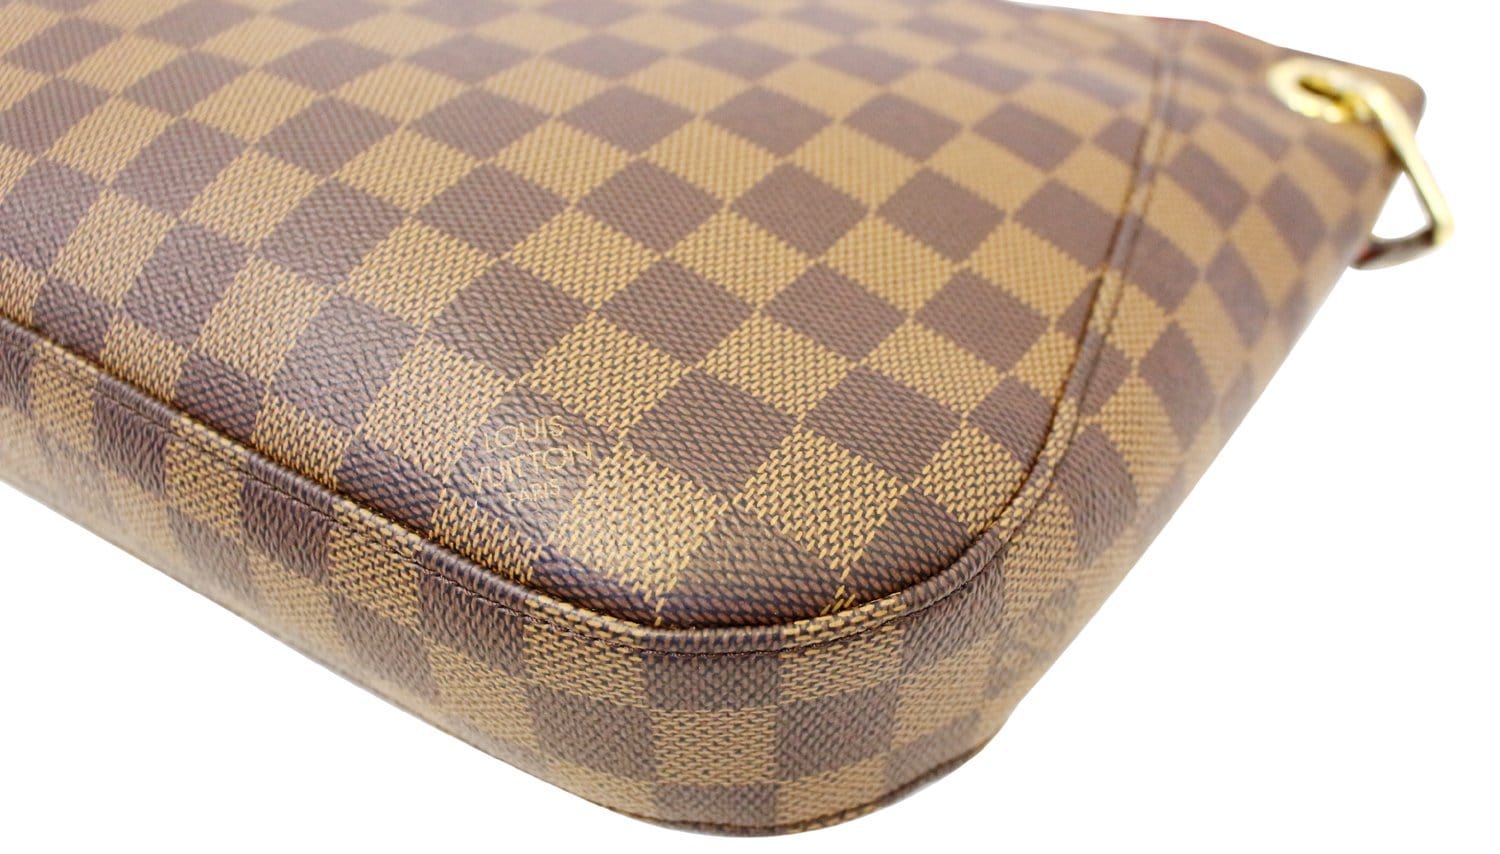 Authentic LV Damier Ebene South Bank Besace for Sale in Lacey